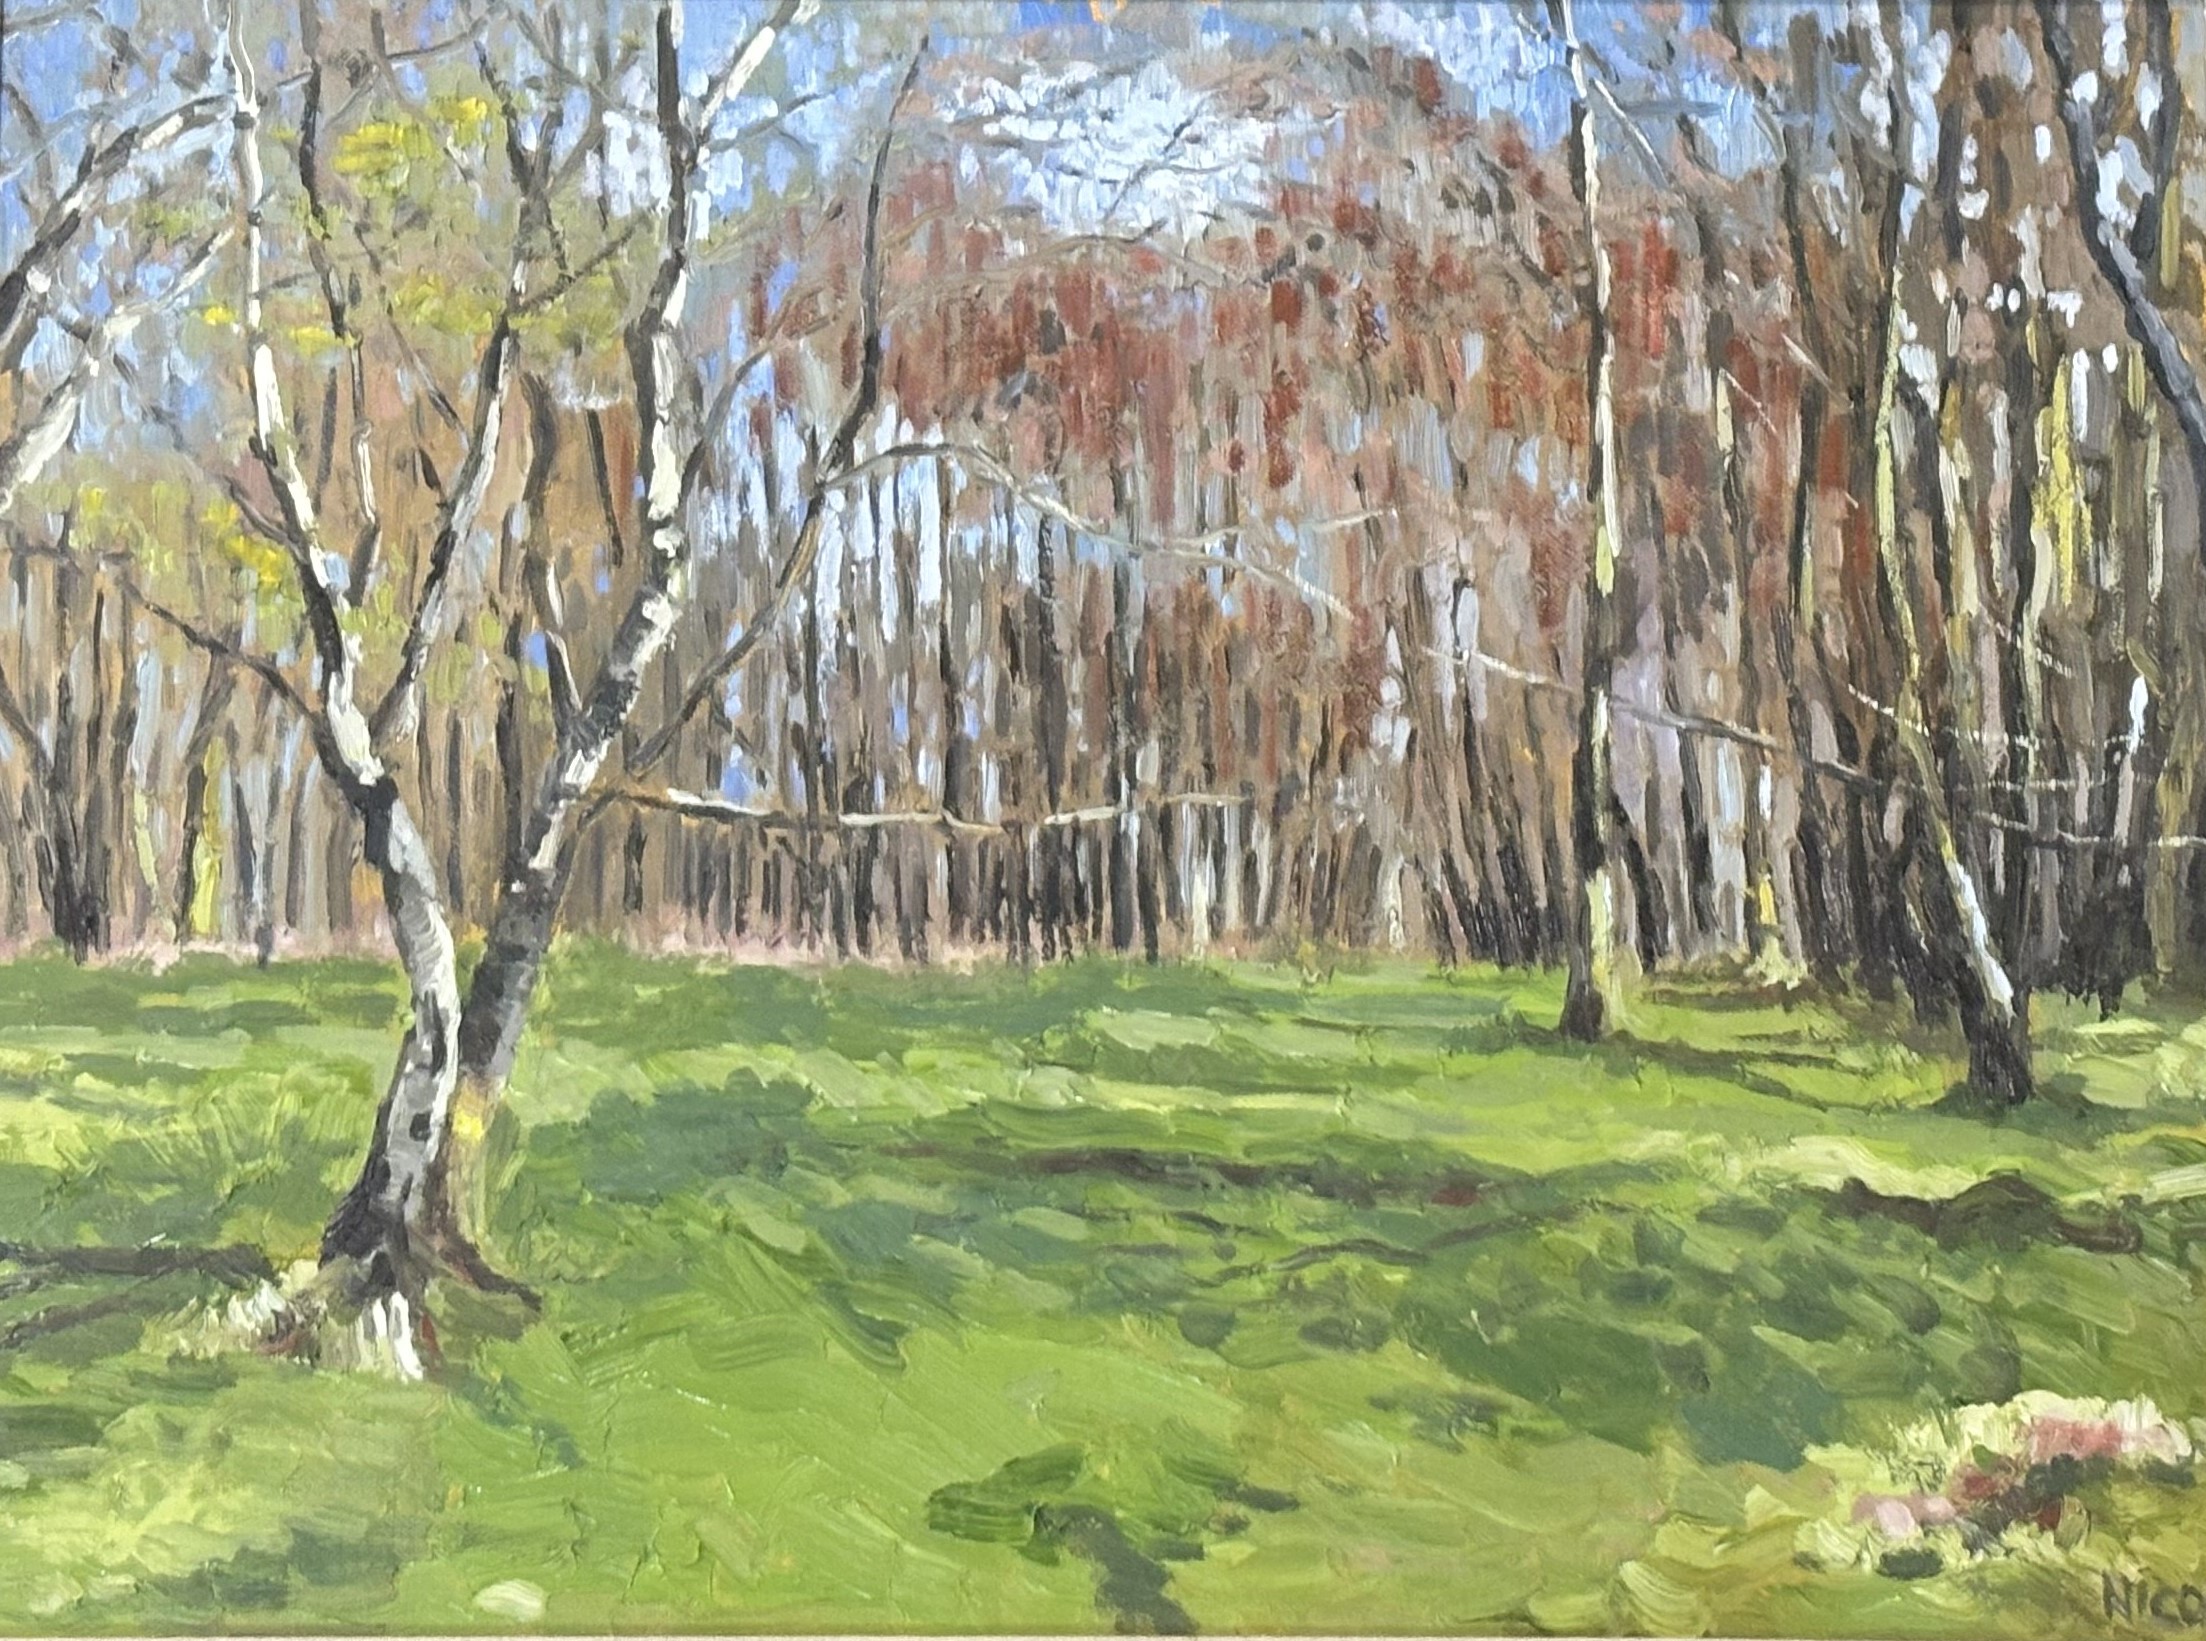 Nicol, summer forest scene, oil on canvas, signed bottom right, in a wooden frame. (44cmx59cm)